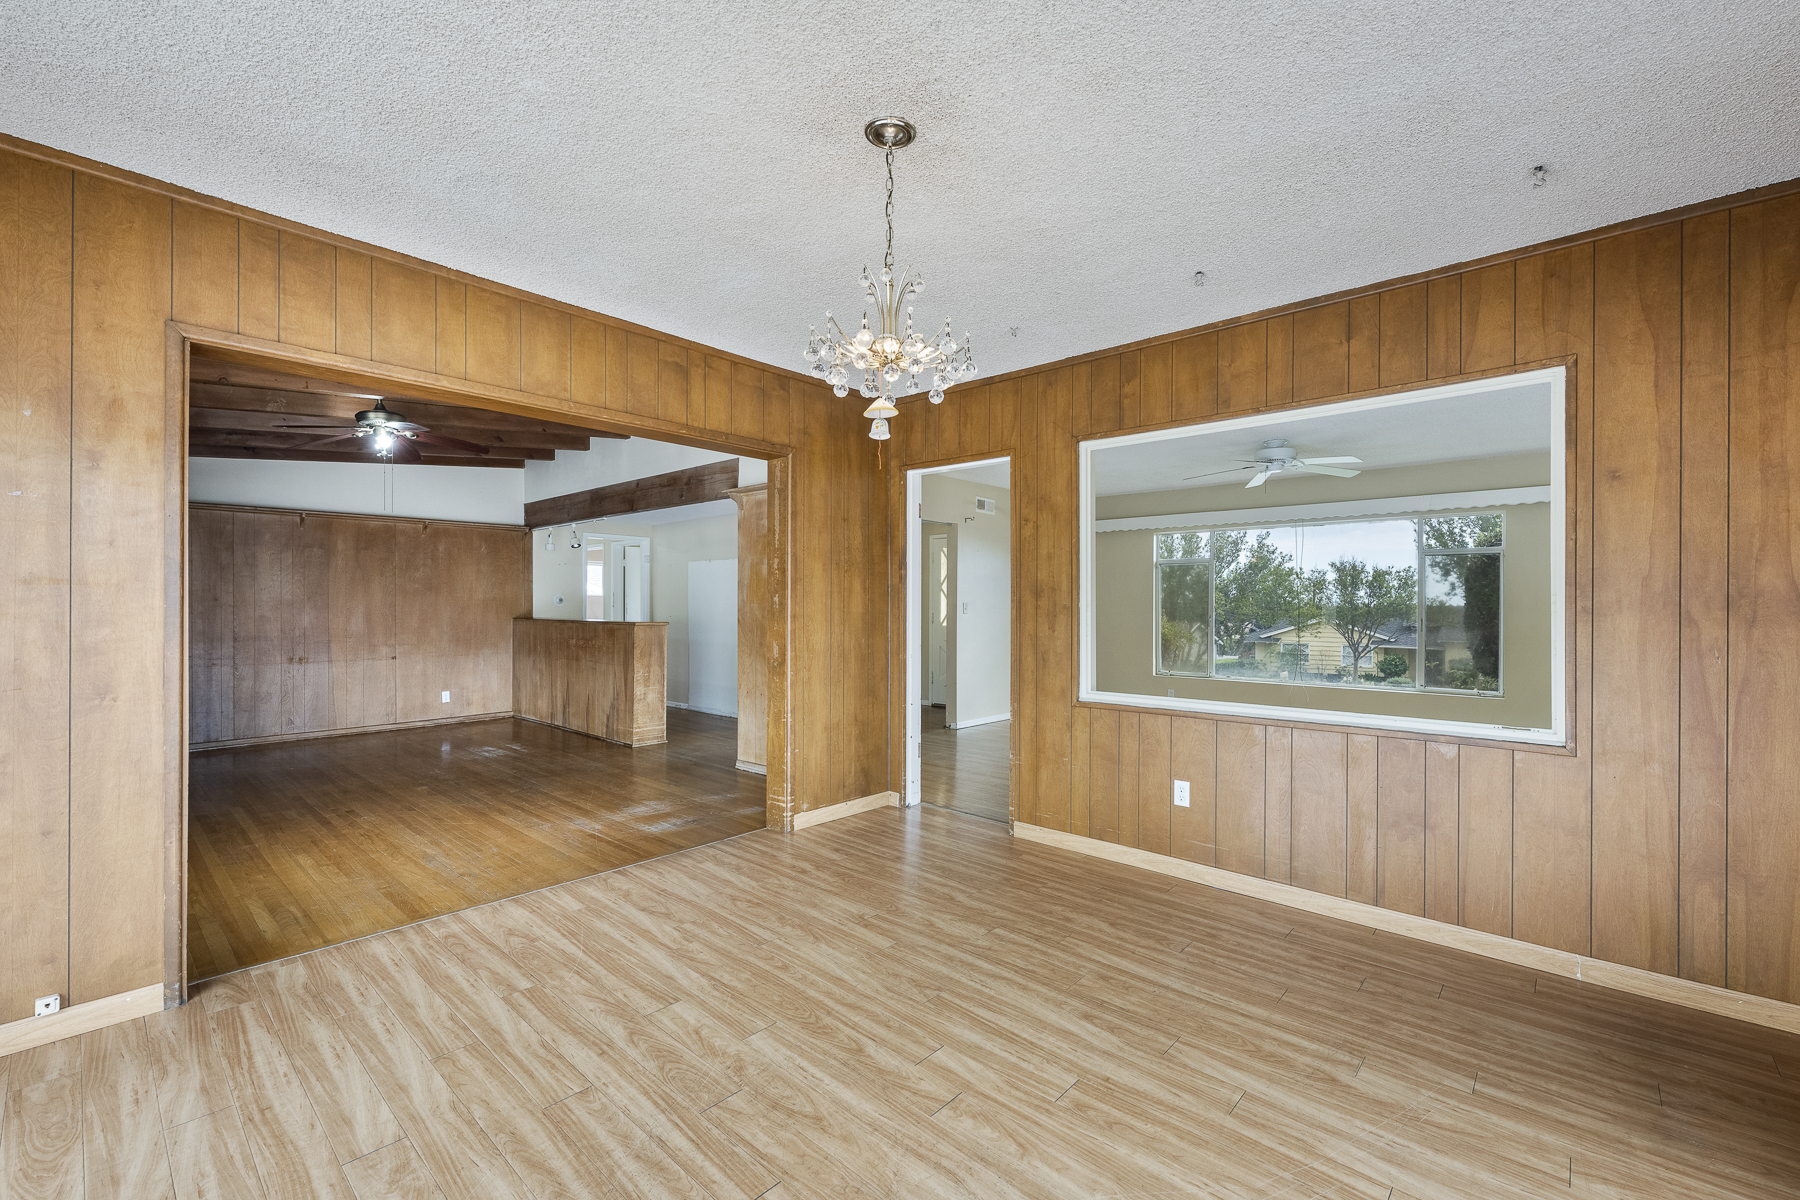 501 Dorothy Drive: Dining room with view into living room